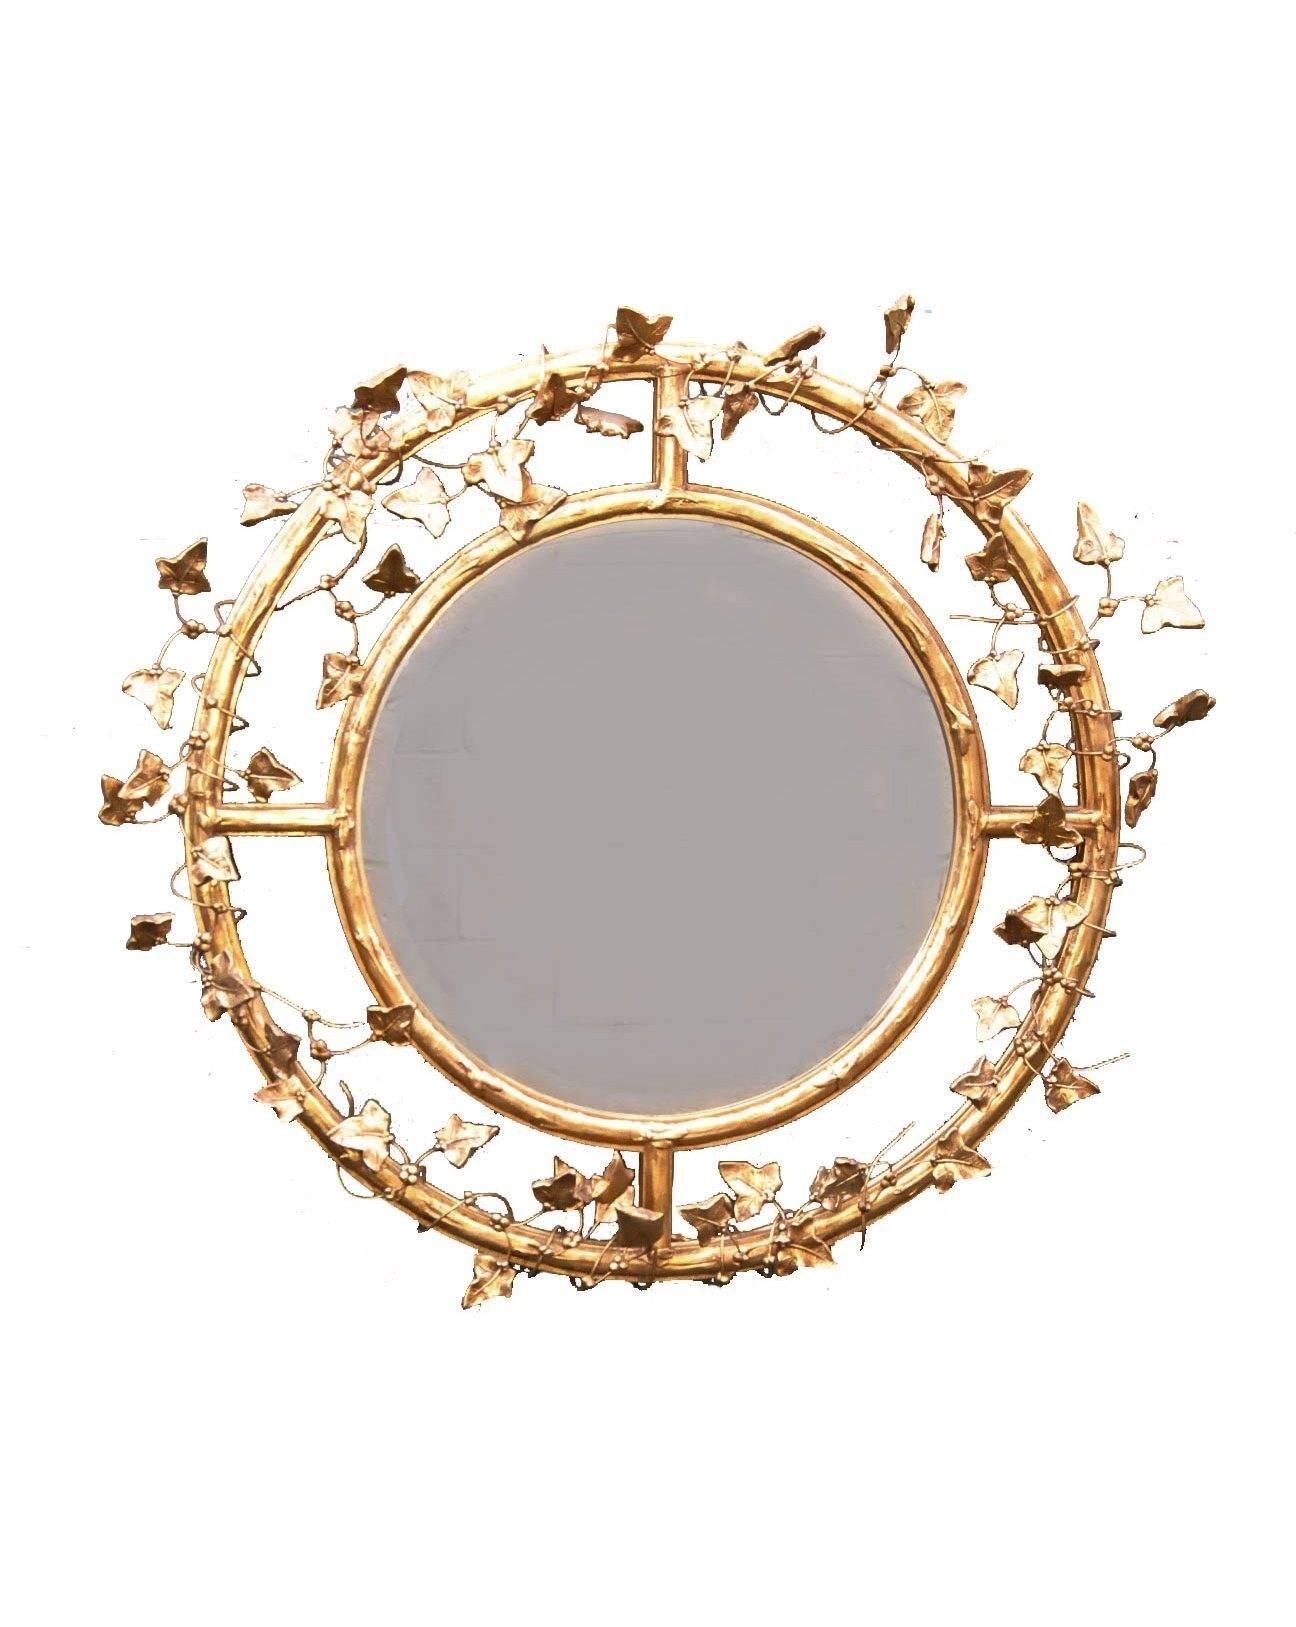 A fine pair of round beveled mirrors handcrafted by Friedman Brothers. They feature a double circle that is wrapped in delicate gold leaves and vines. Their impressive size and stunning design will easily add character to any room where they are